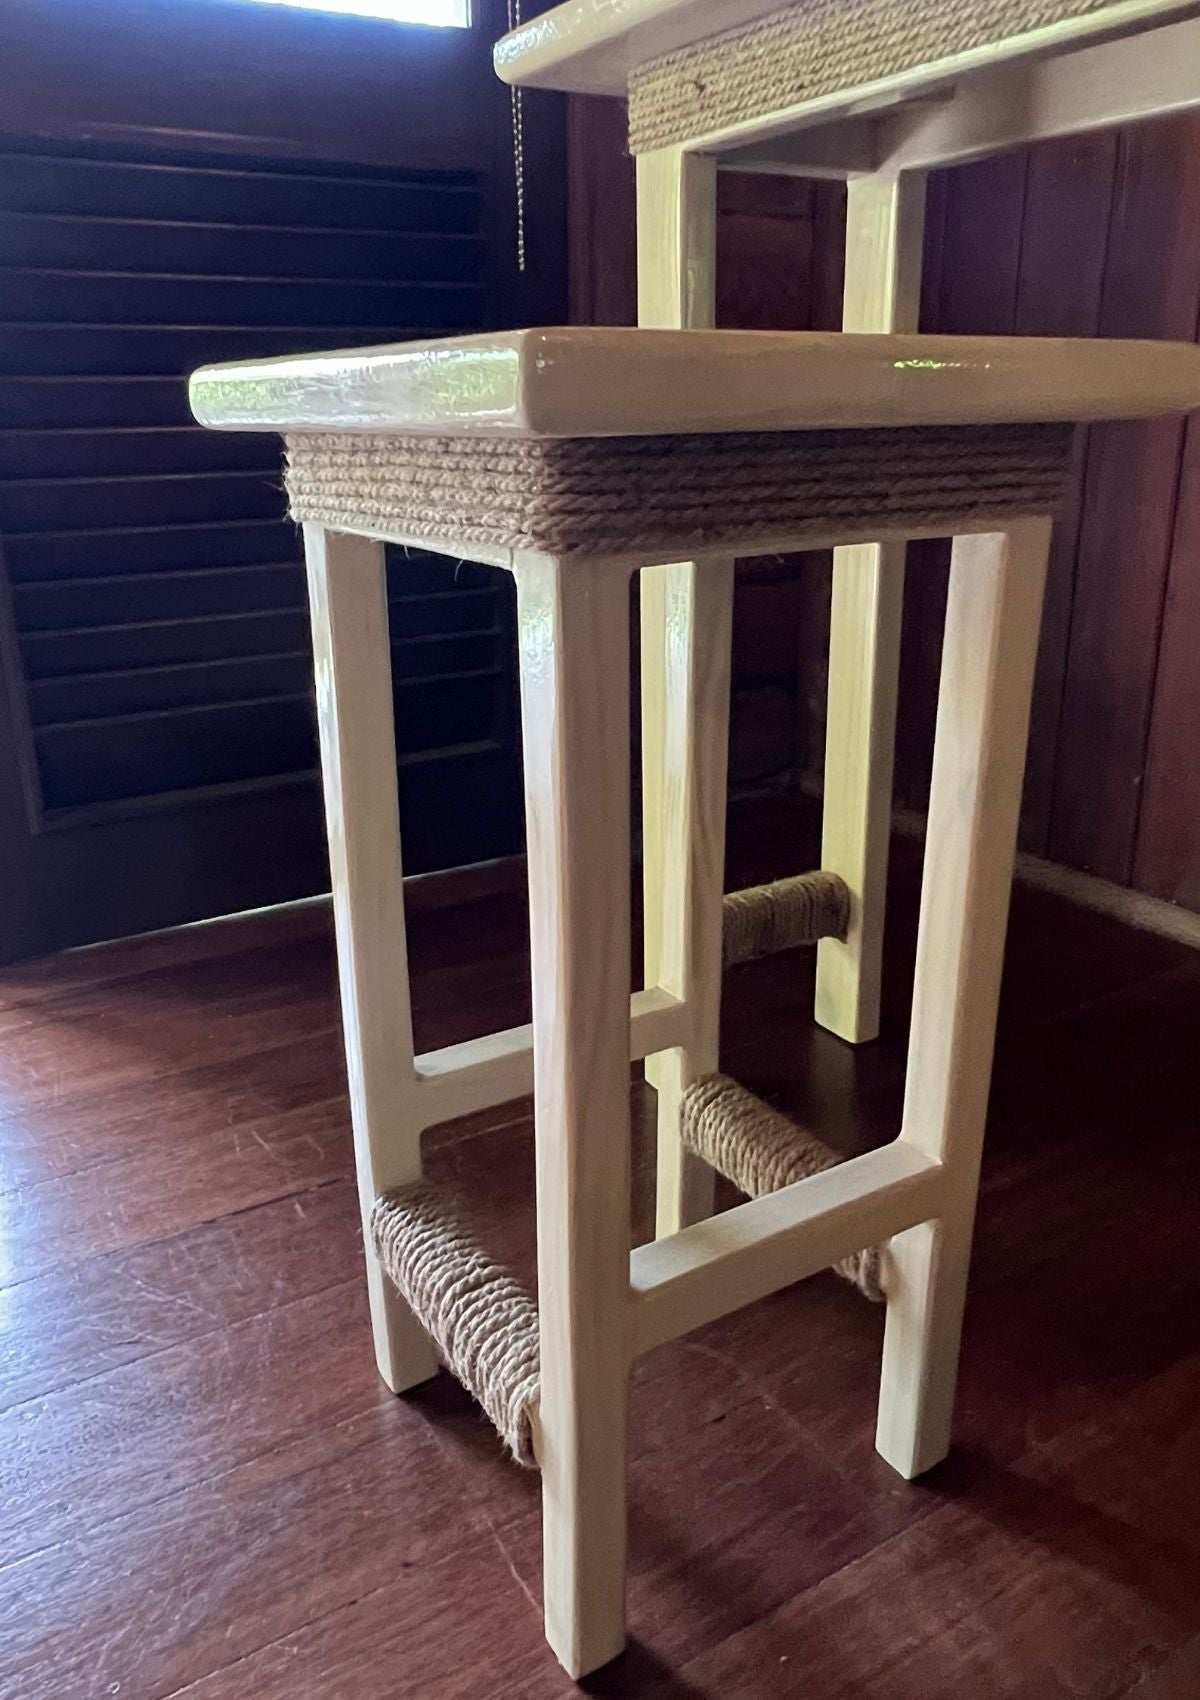 Handmade Natural Tone Bar Table and Stool Set with Twine Detail